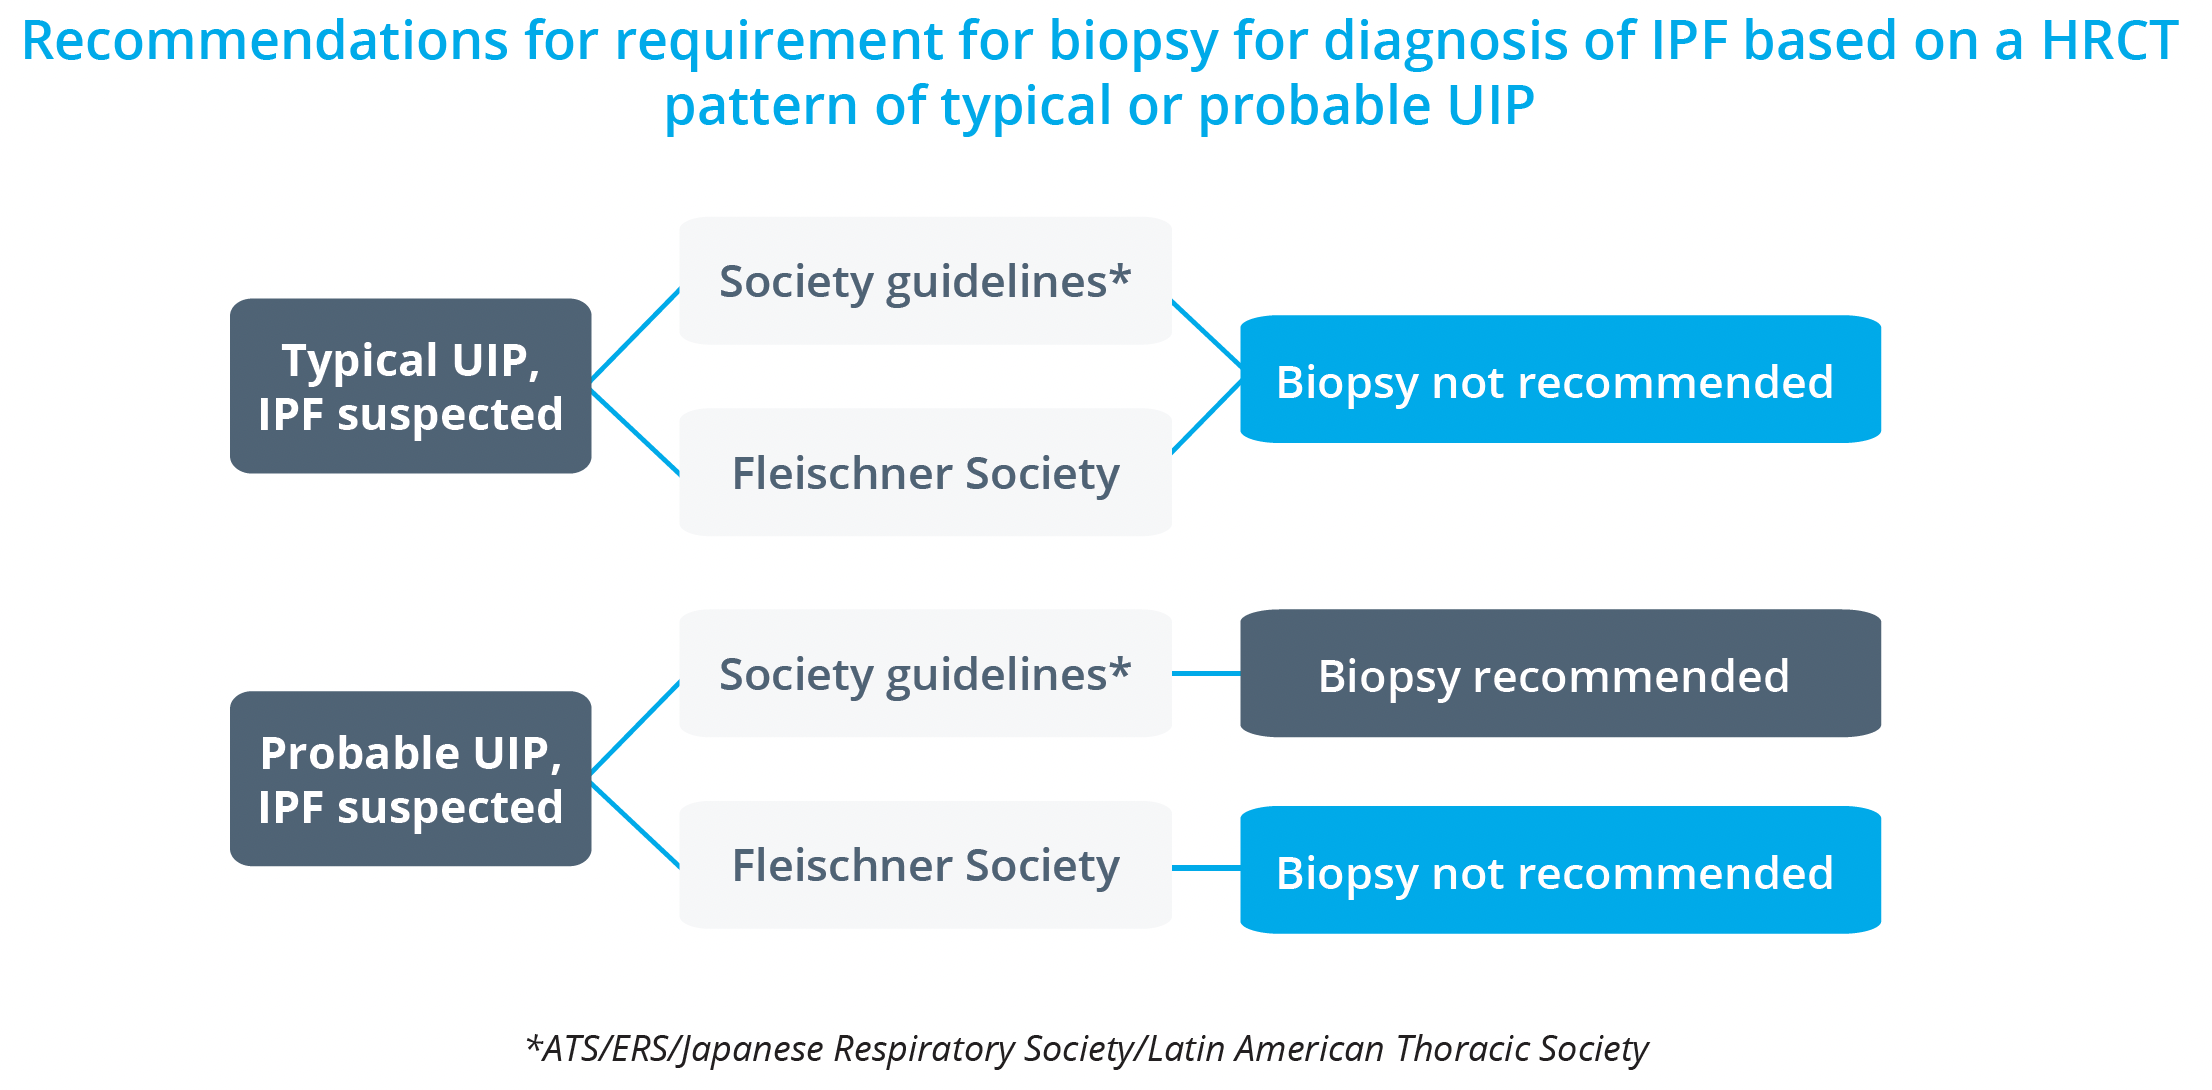 Biopsies are recommended only by society guidelines for diagnosis of IFP based on an HRCT pattern of probable UIP.